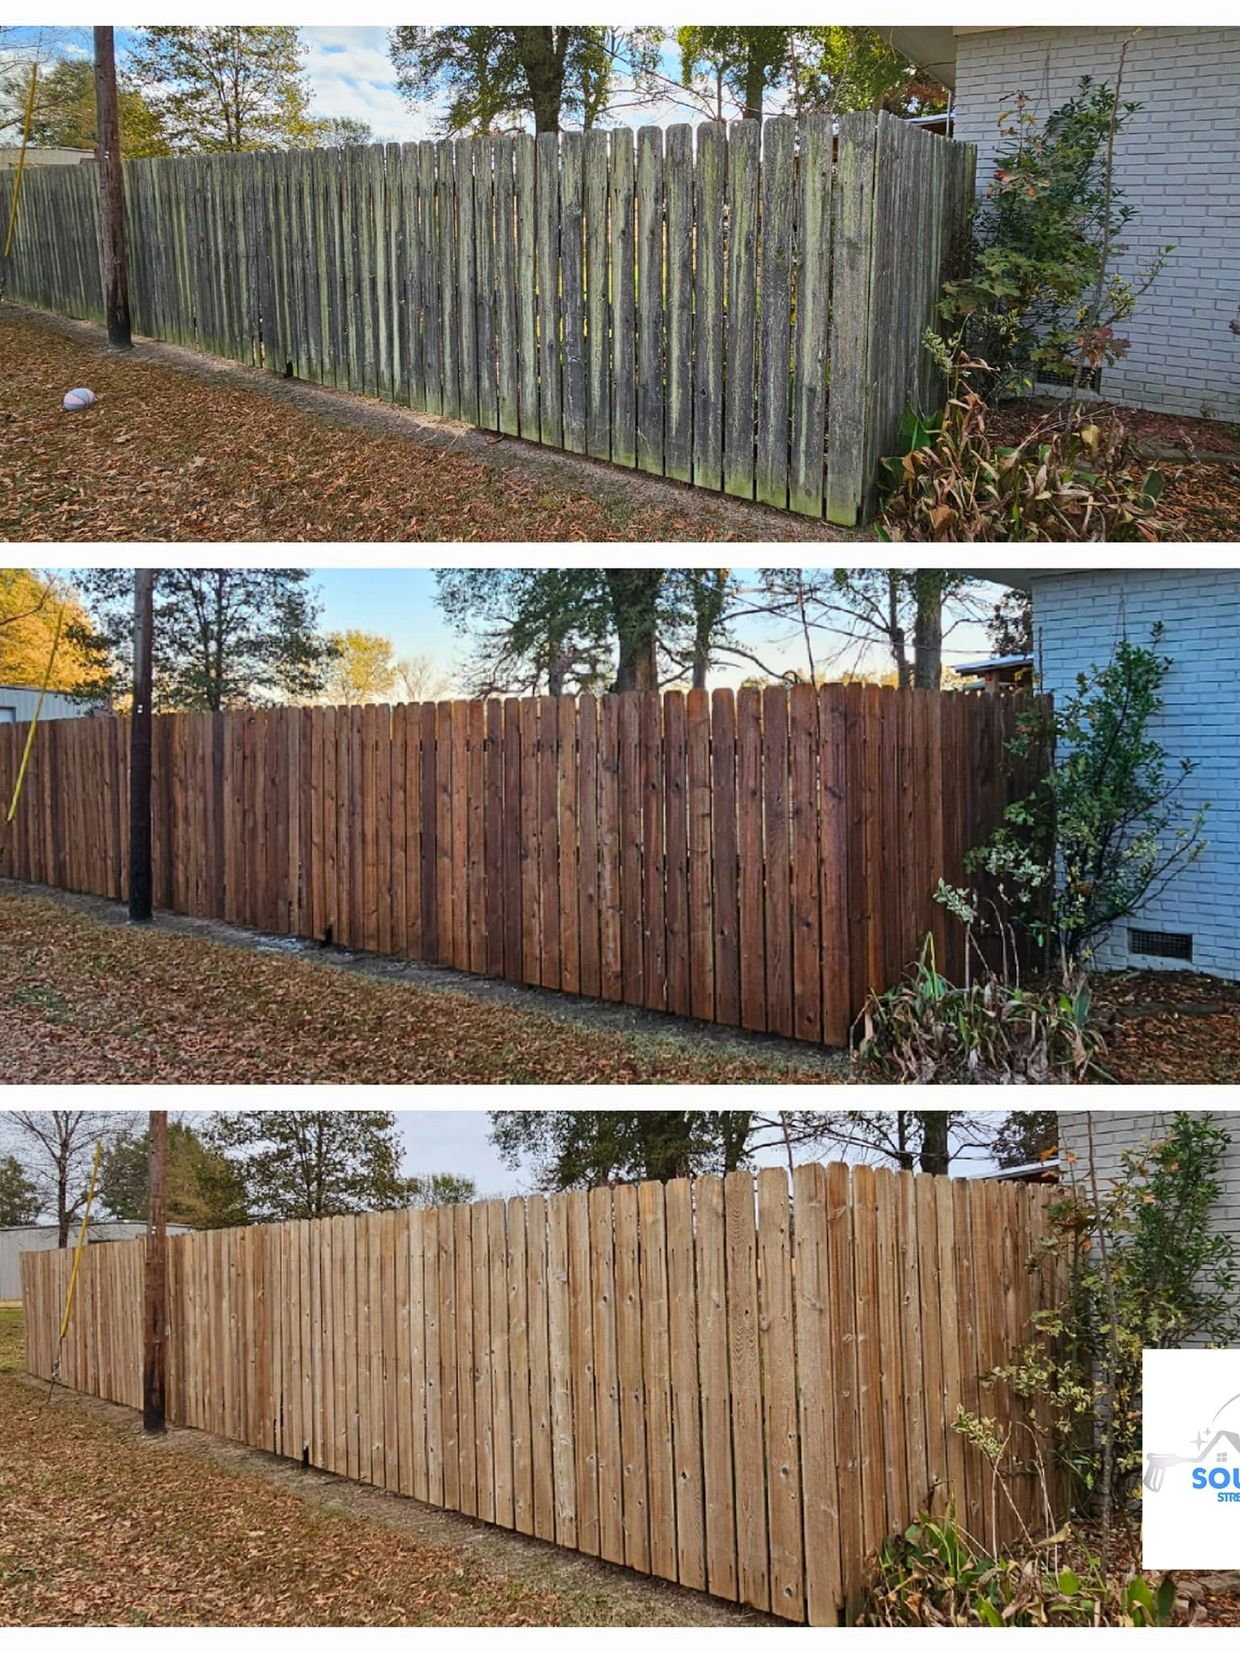  <img src=”fence.jpg” alt=”wood fence before and after receiving a wood cleaning”/>